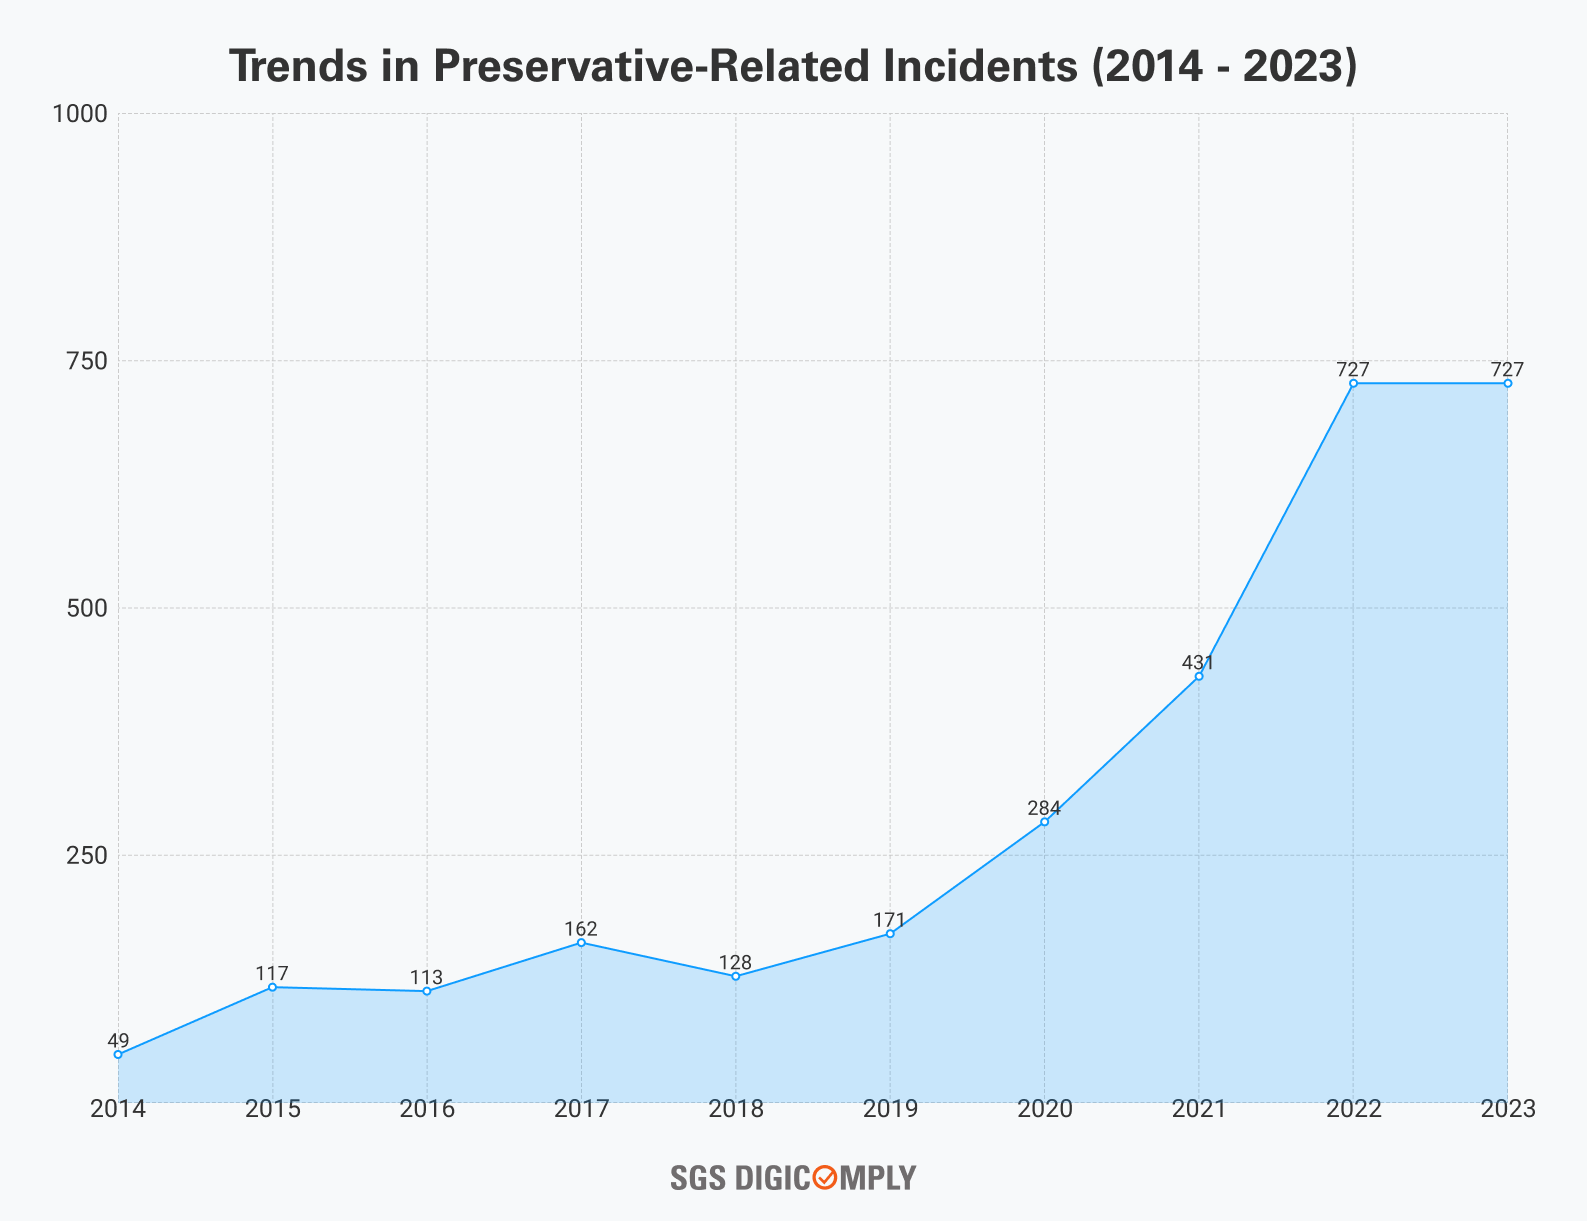 preservatives incidents trend 10 years